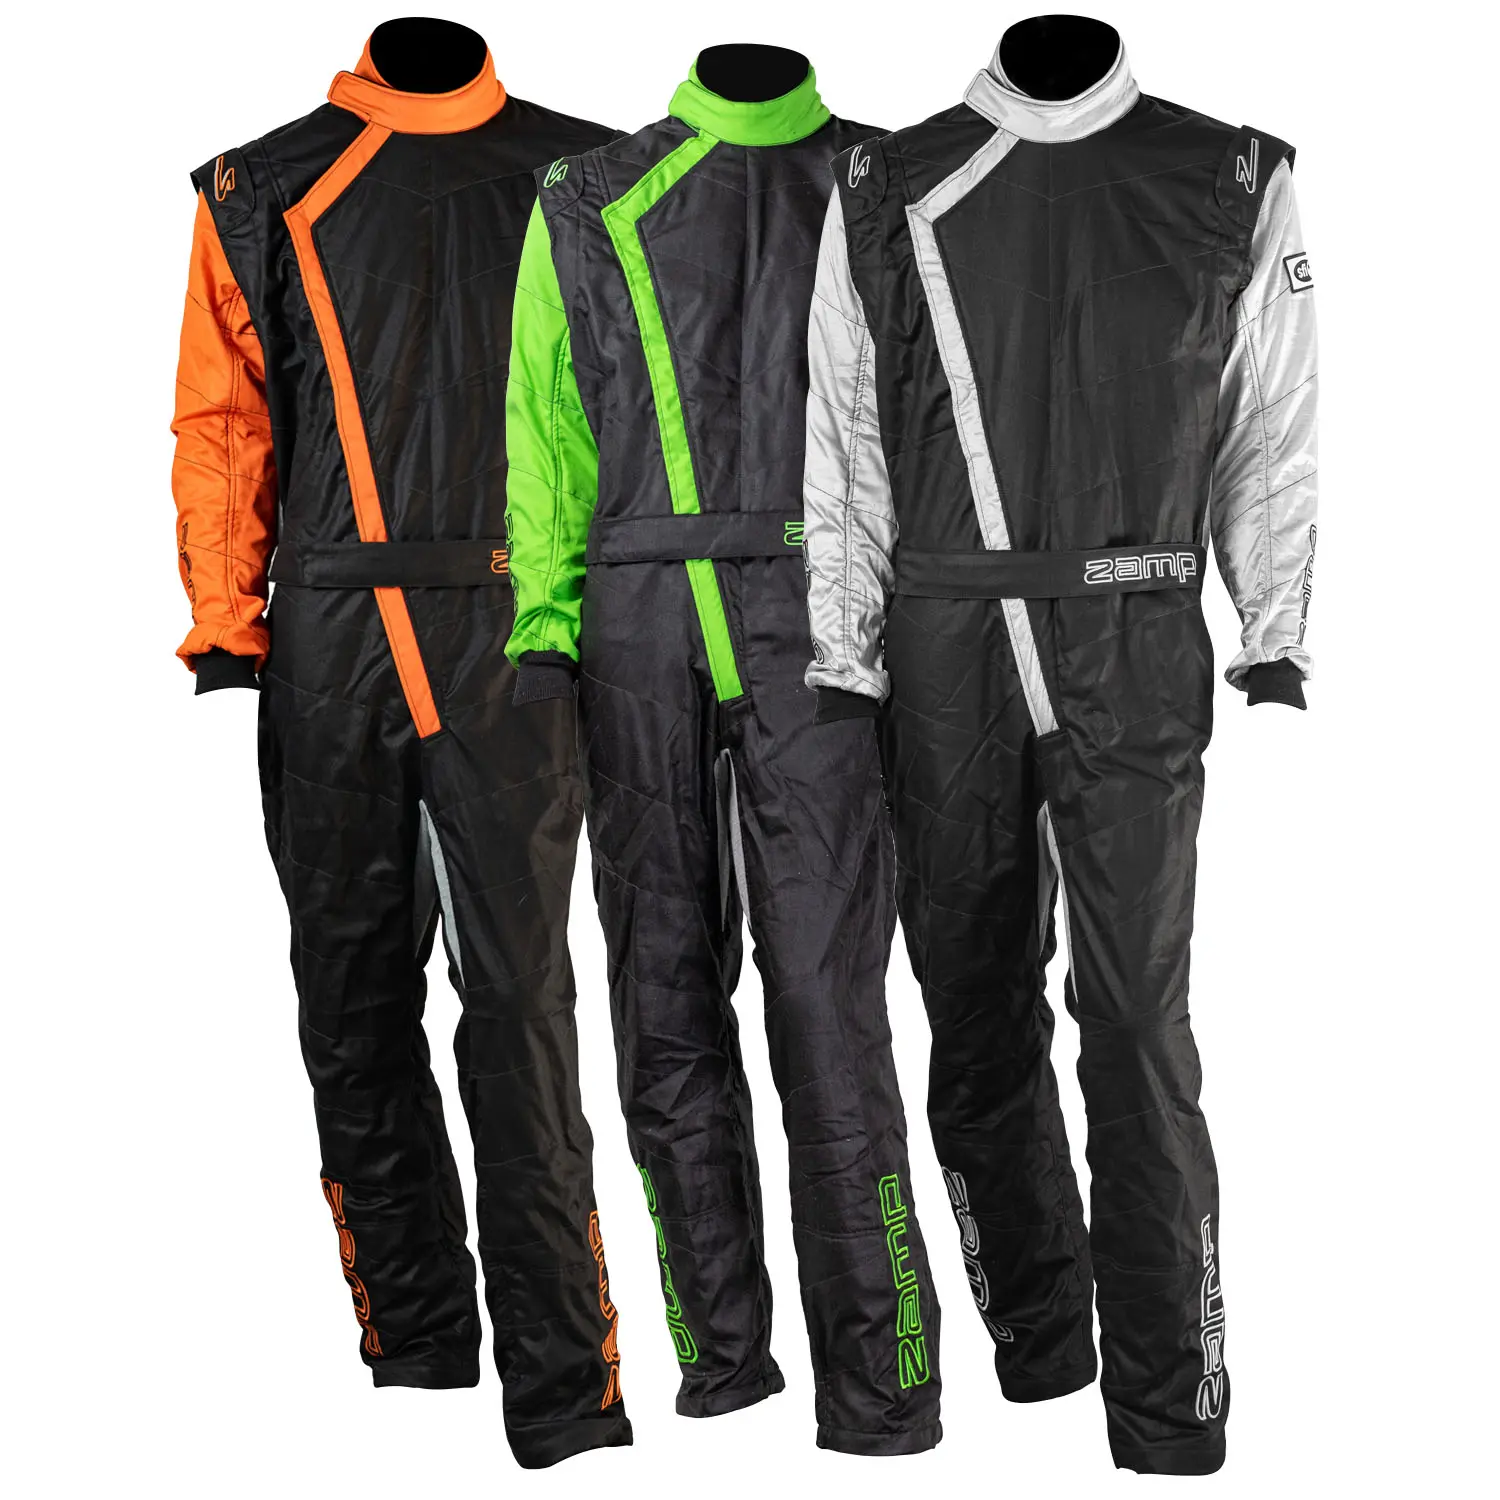 ZR-40 Youth Racing Suits